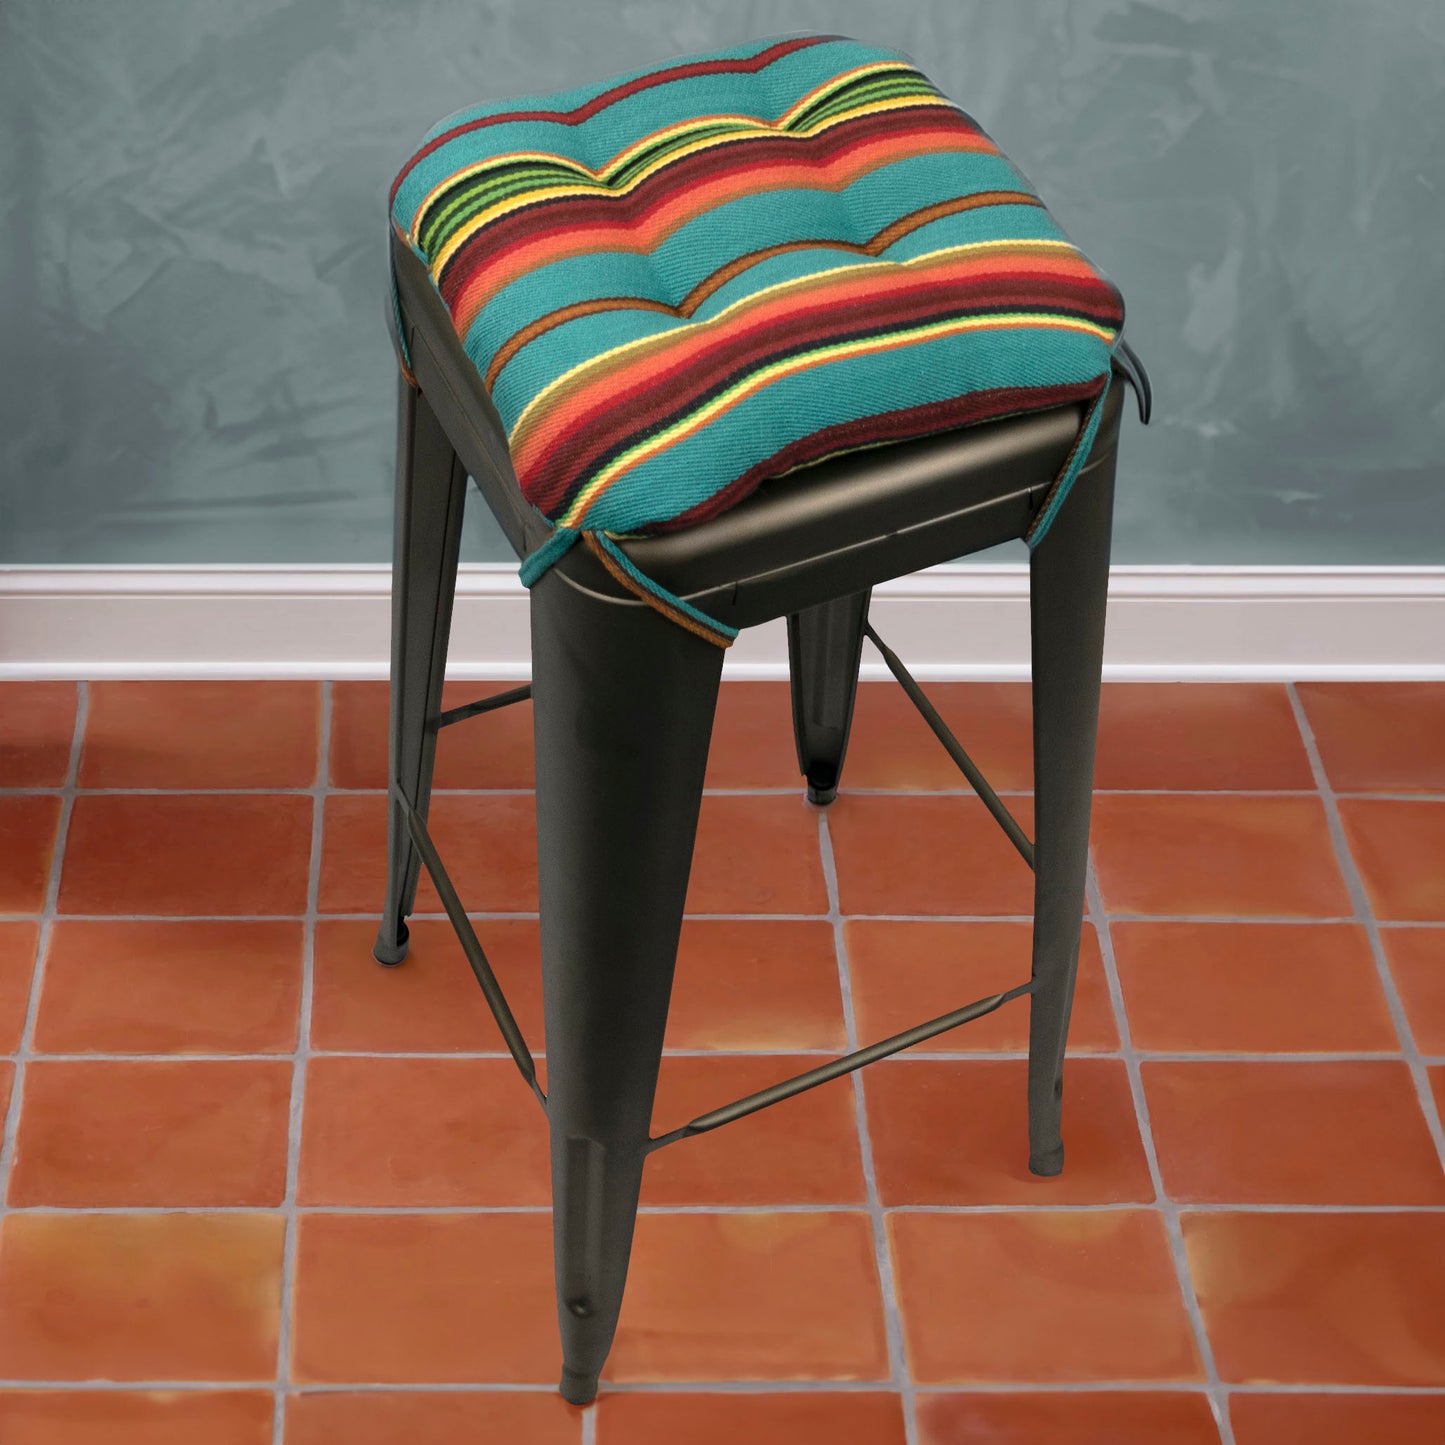 mexican saddle blanket poncho striped stool cushion square